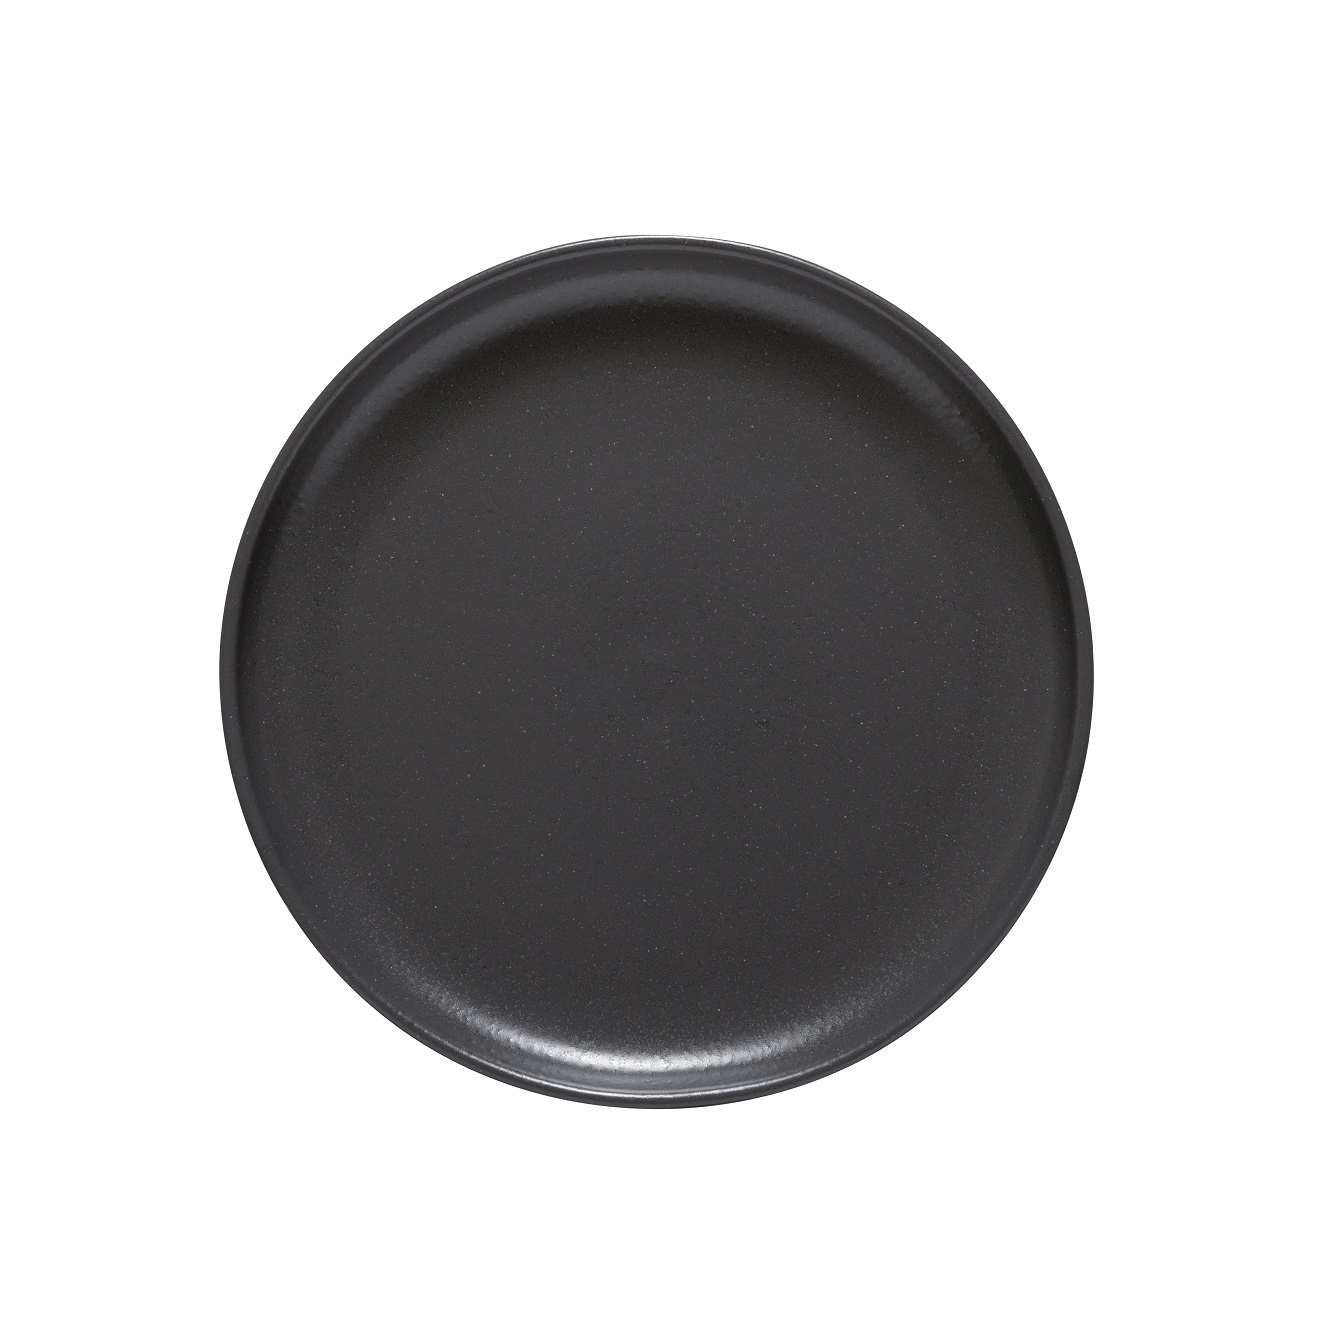 Pacifica Seed Grey Dinner Plate 27.5cm Gift